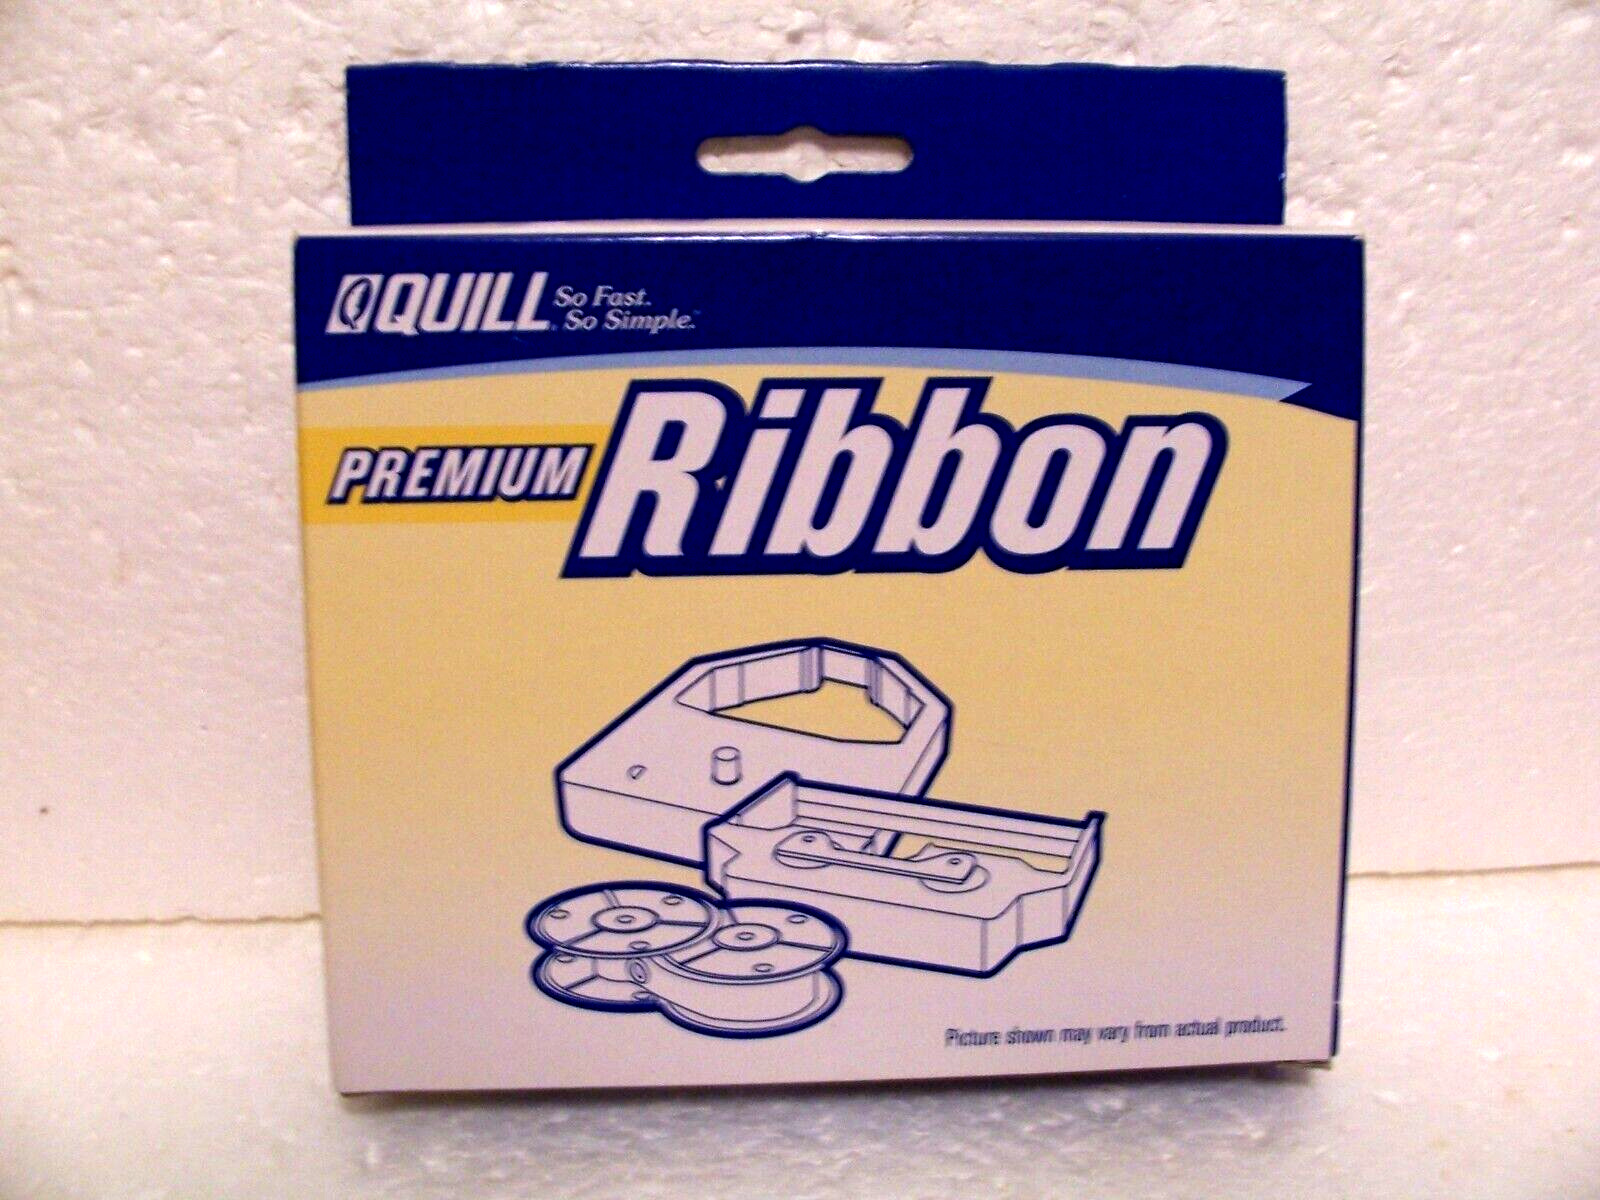 Quill: Premium Typewriter Ribbon 7-11483 Brother models NEW SEALED store stock